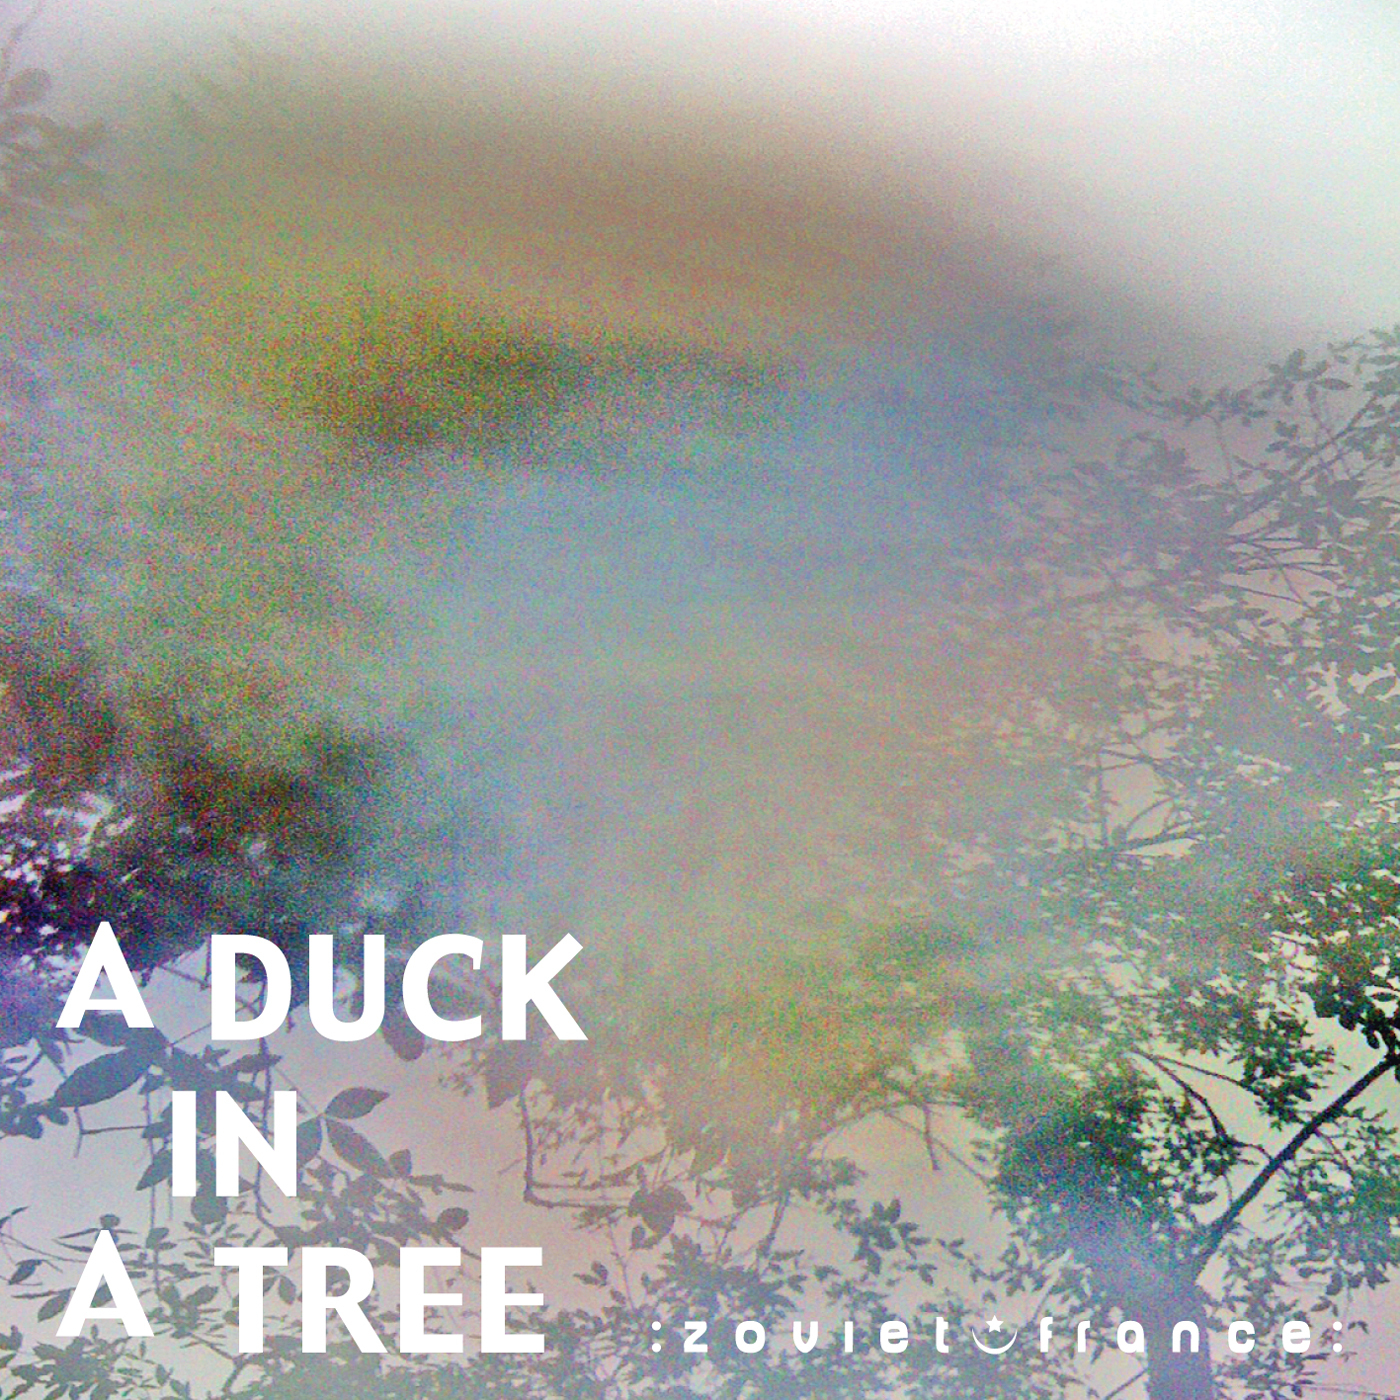 A-Duck-in-a-Tree-2013-01-26-_-This-Strangers-Kiss-This-Red-Moon-layout-1400.jpg